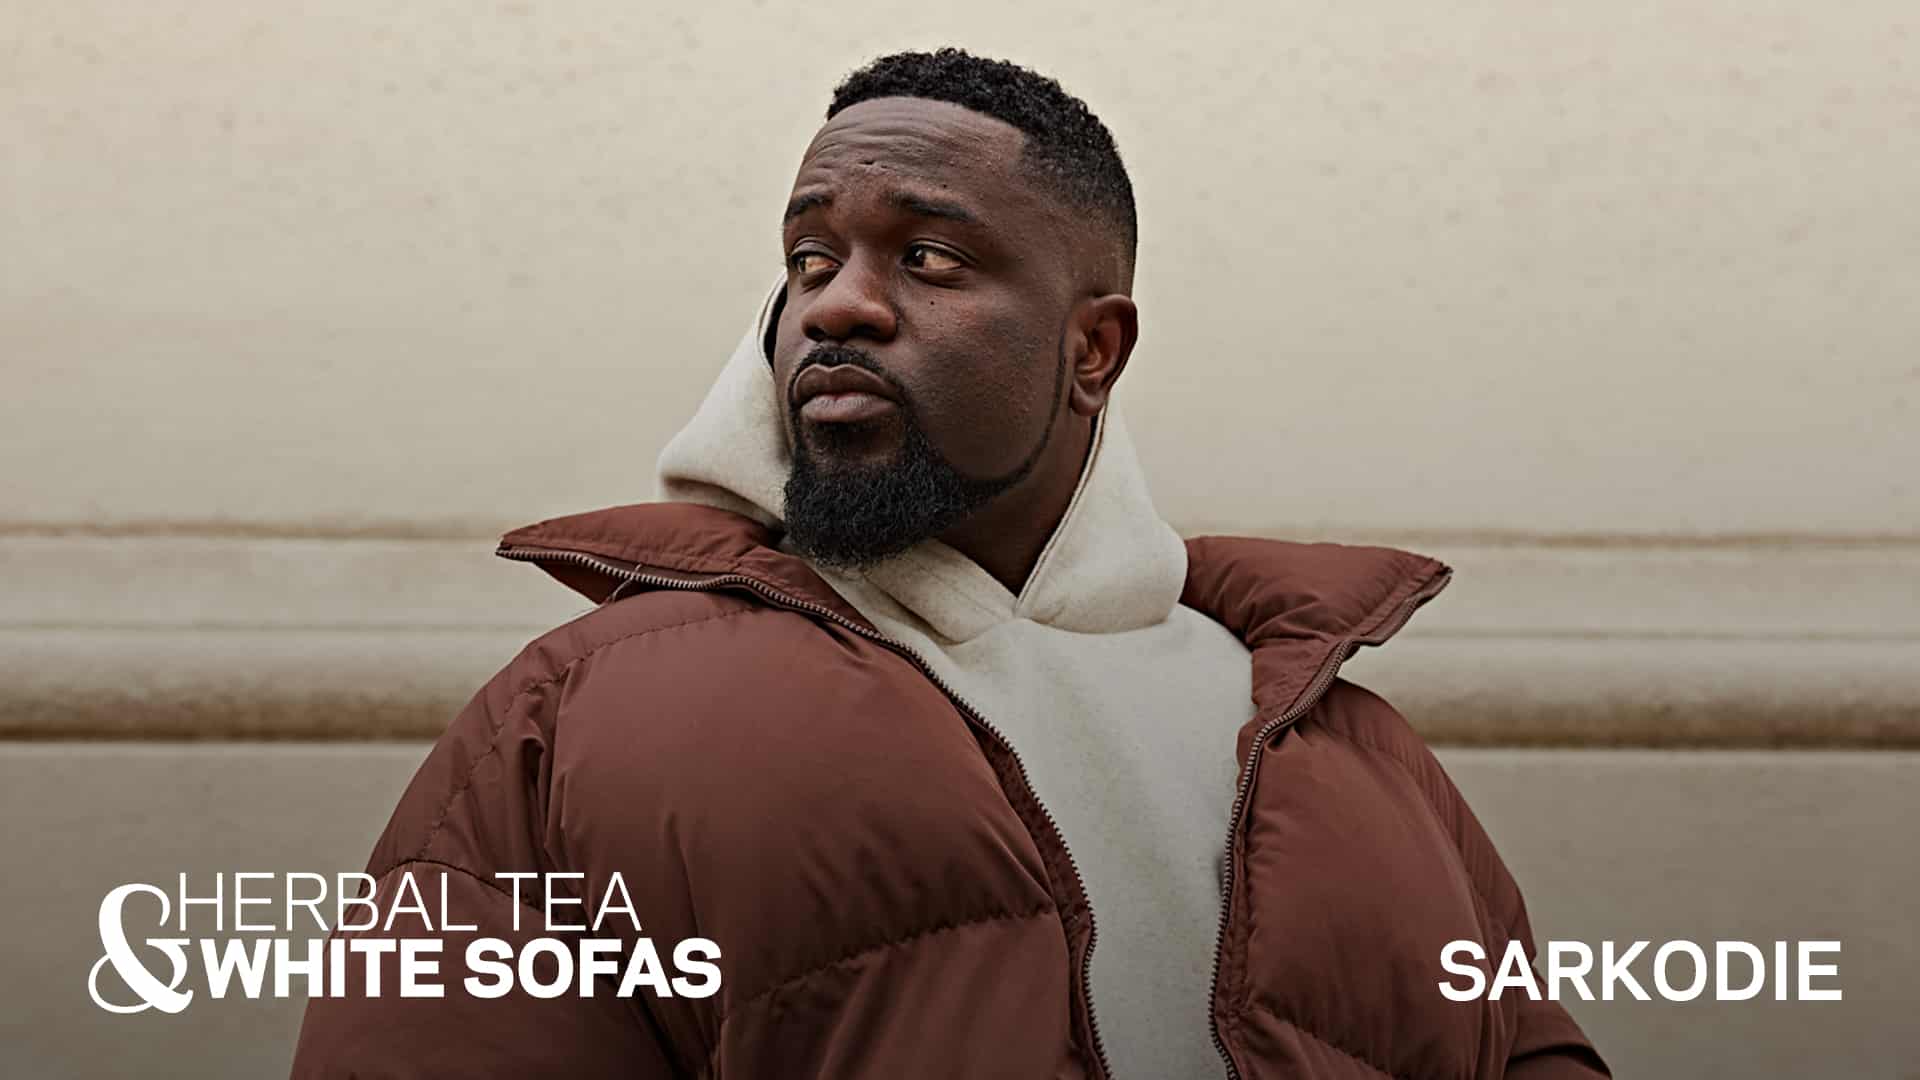 Watch video as Sarkodie shares snippets of upcoming interview with Grammy on thier Herbal Tea & White Sofas series